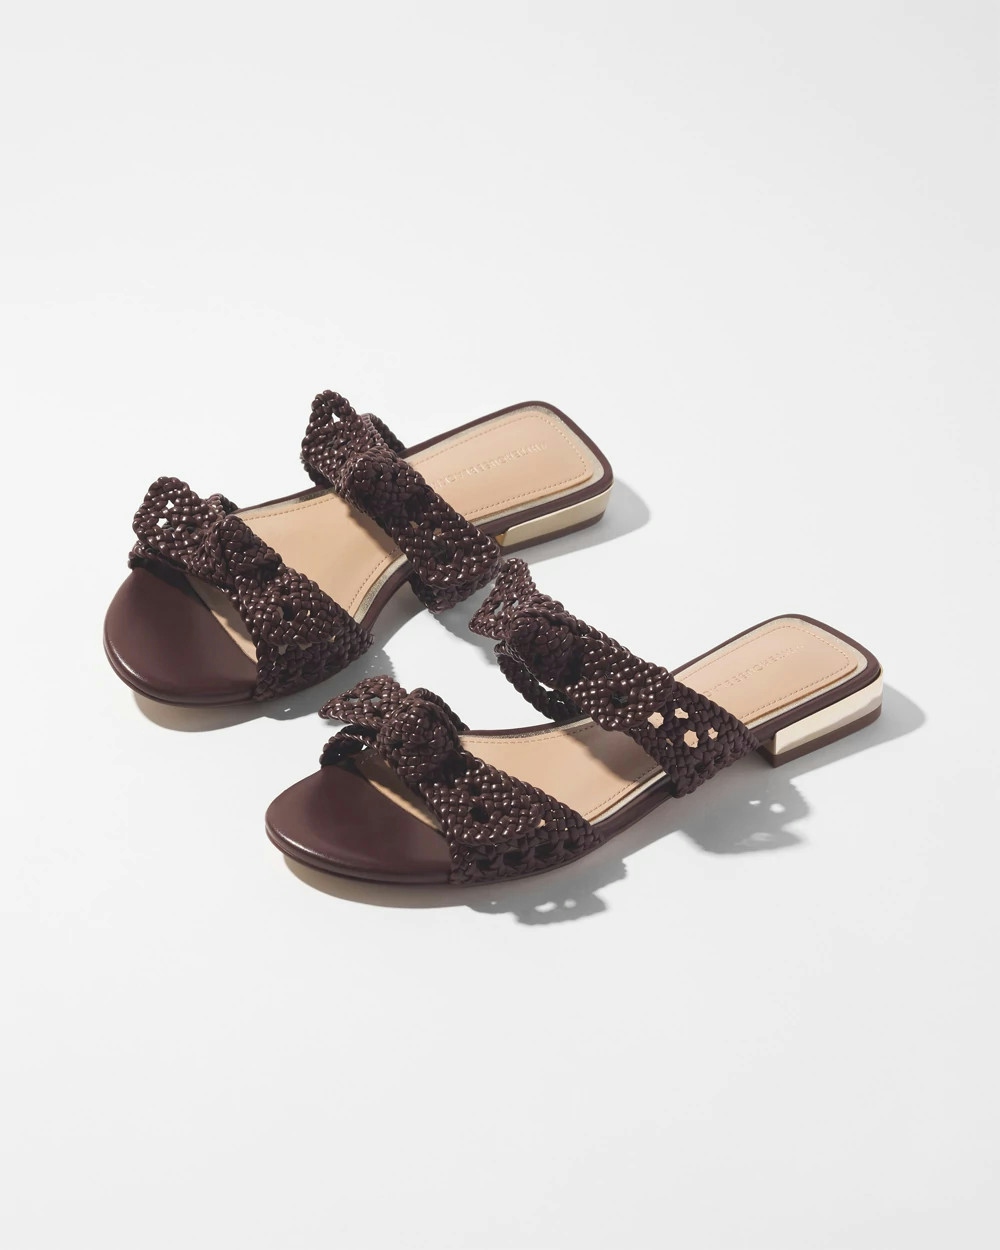 Shop White House Black Market Braided Sandals In Rocky Cliff